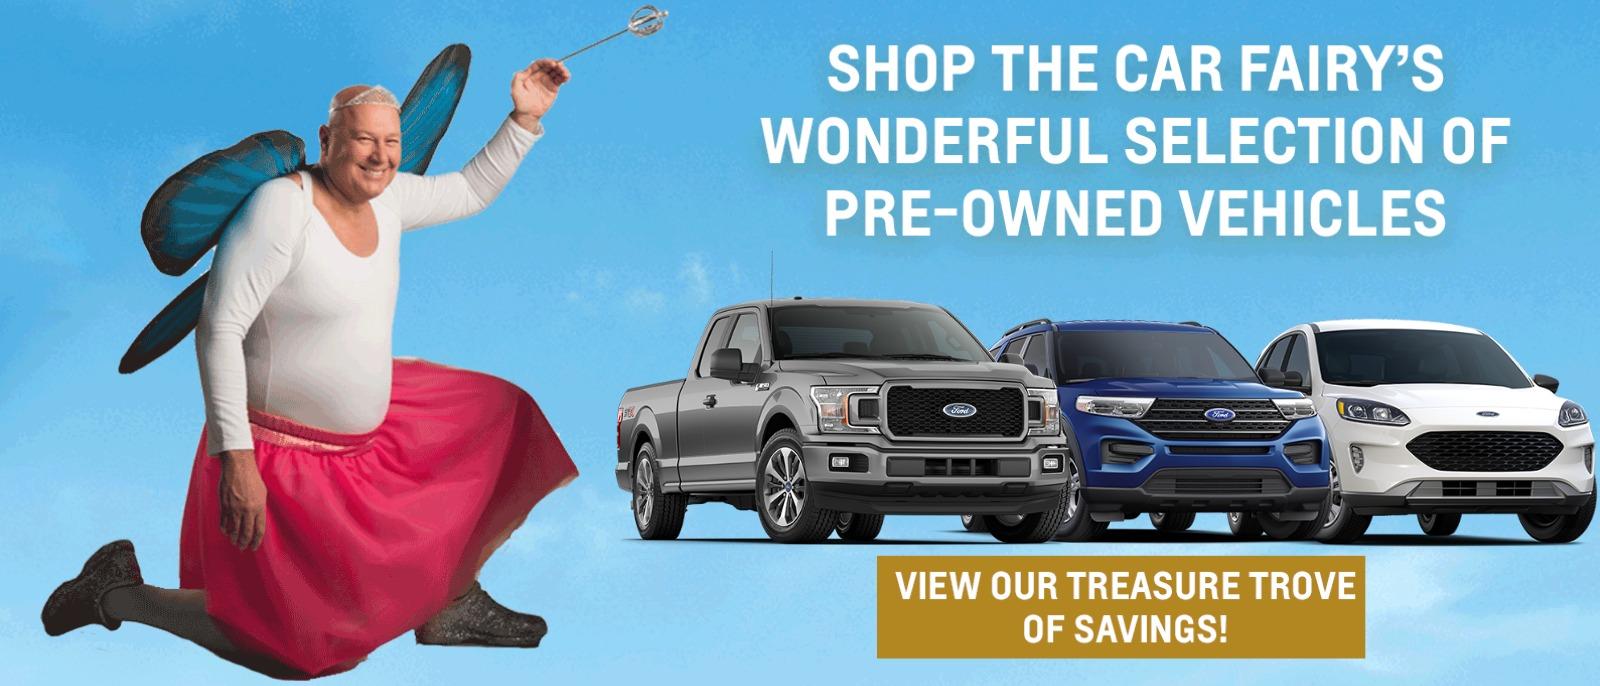 Shop the Car Fairy's Wonderful Selection of Pre-Owned Vehicles - View Our Treasure Trove of Savings